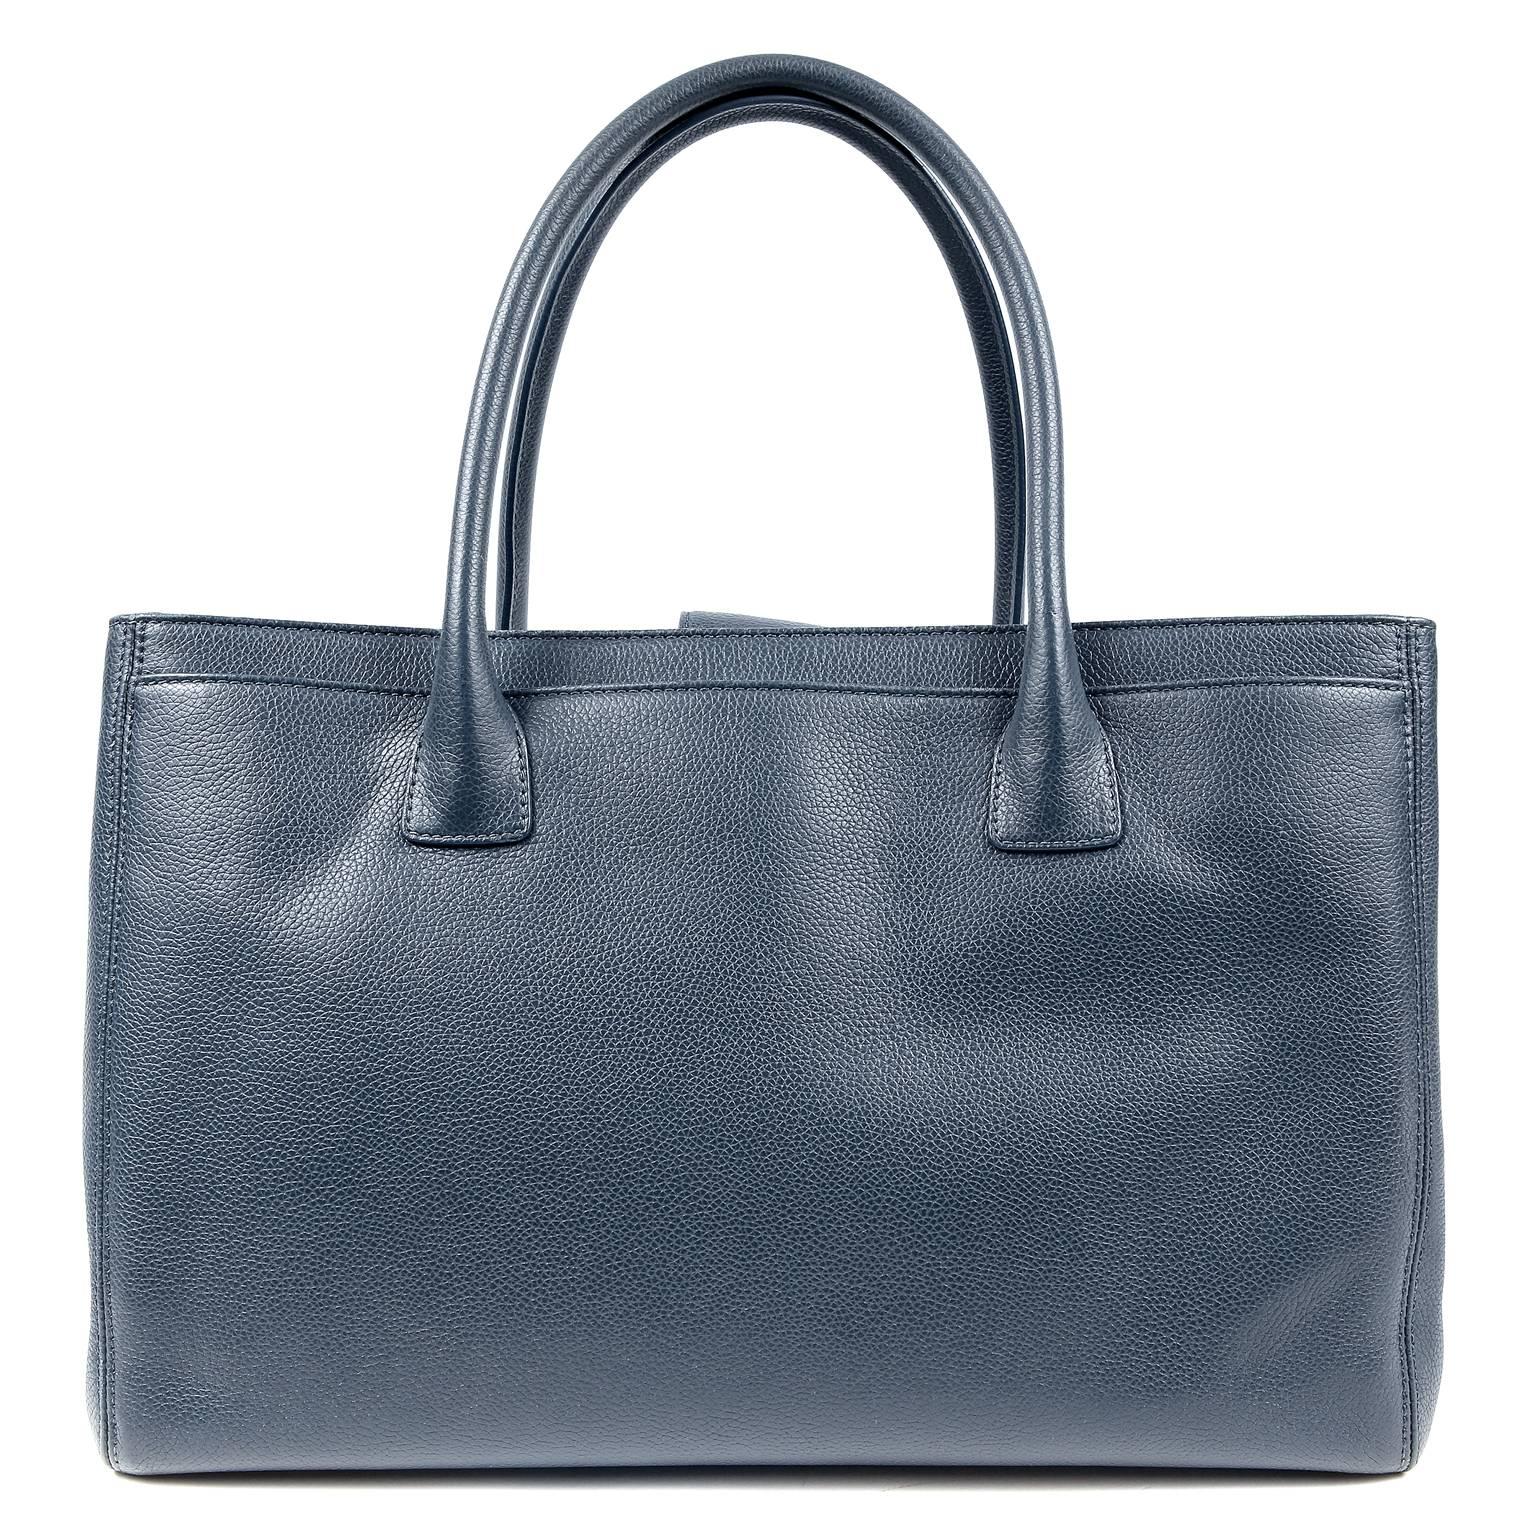 Chanel Navy Leather Cerf Tote- Pristine Condition
The classic style is equally popular for professional or casual daily use. 

Grained navy blue leather tote has a silver interlocking CC twist lock securing a spacious front pocket.  A magnetic snap